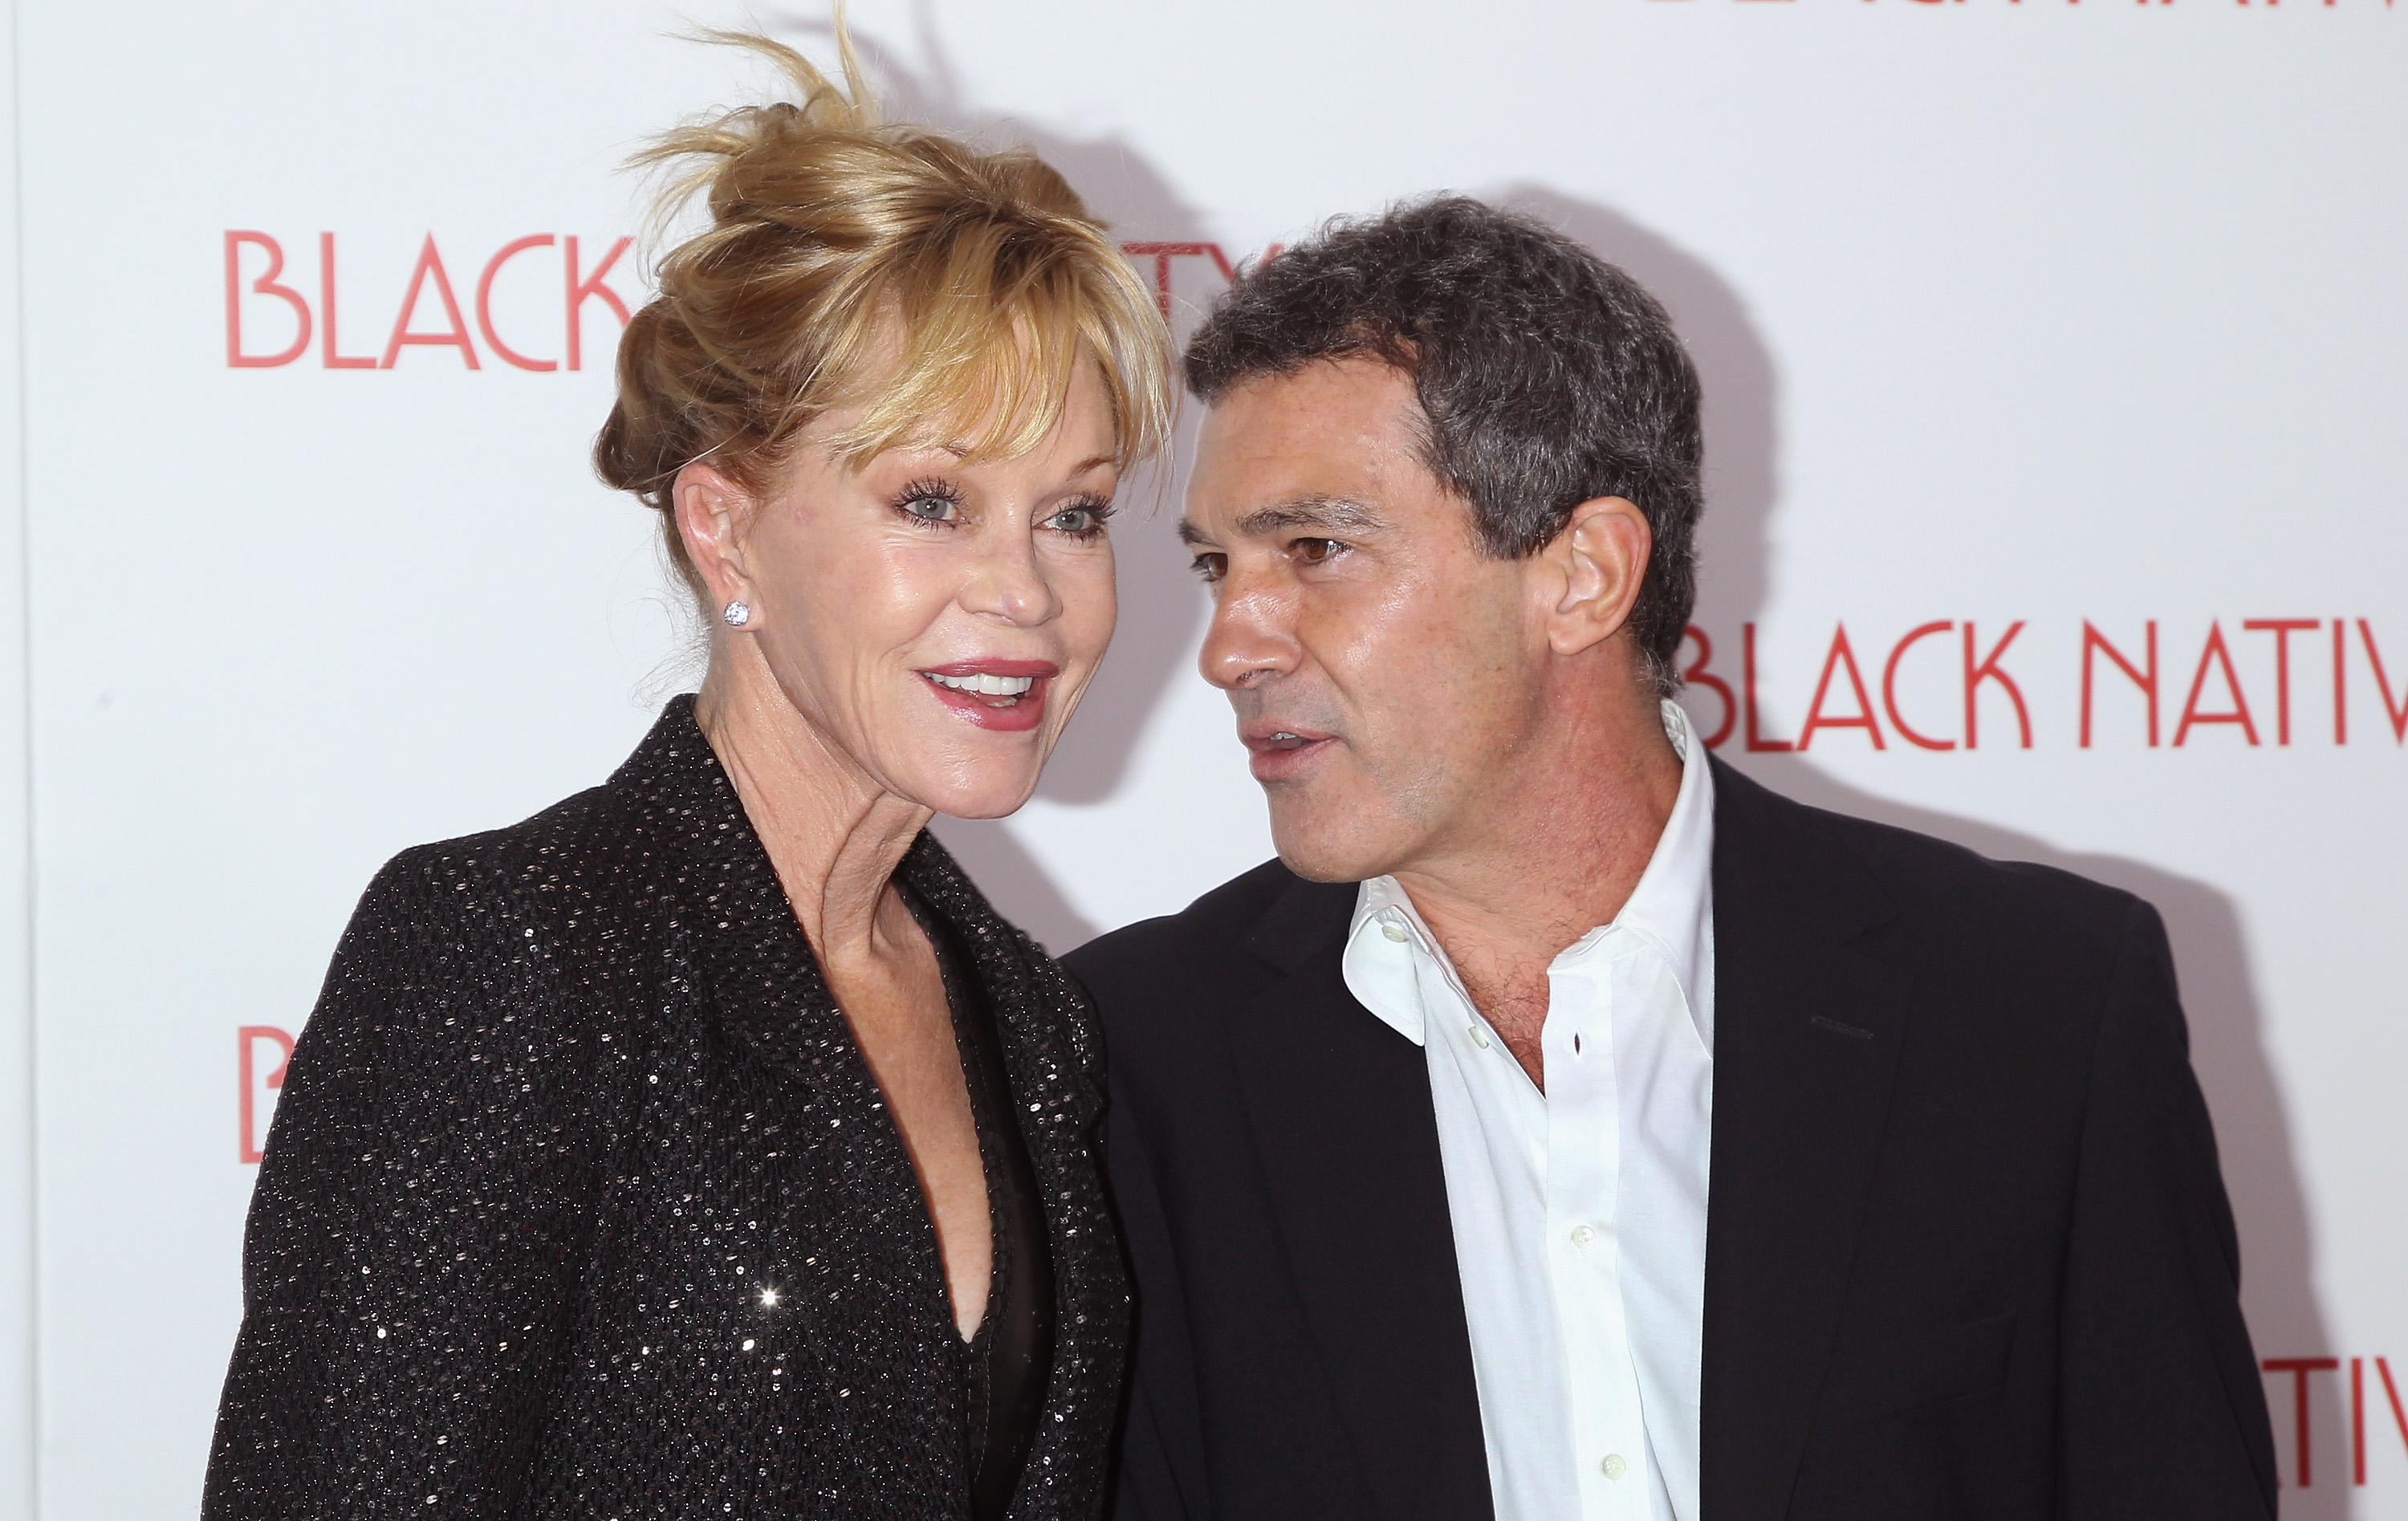 Melanie Griffith and Antonio Banderas attend the "Black Nativity" premiere at The Apollo Theater on November 18, 2013, in New York City. | Source: Getty Images